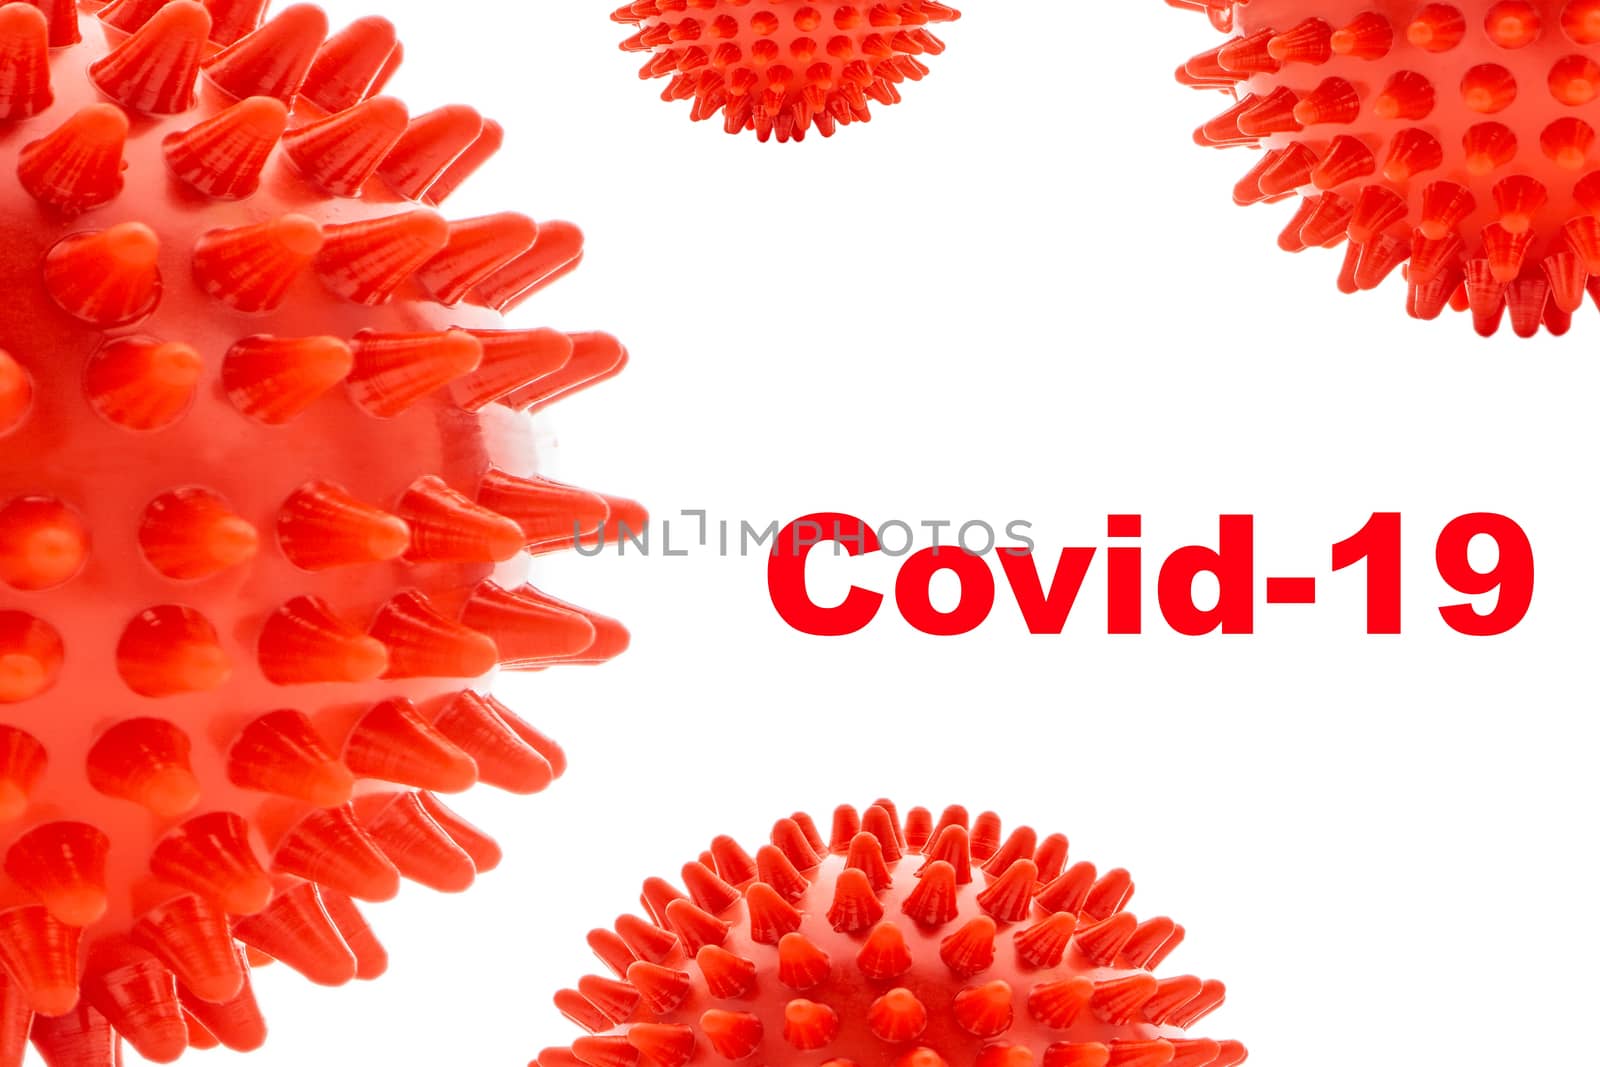 COVID-19 text on white background. Covid-19 or Coronavirus concept by silverwings